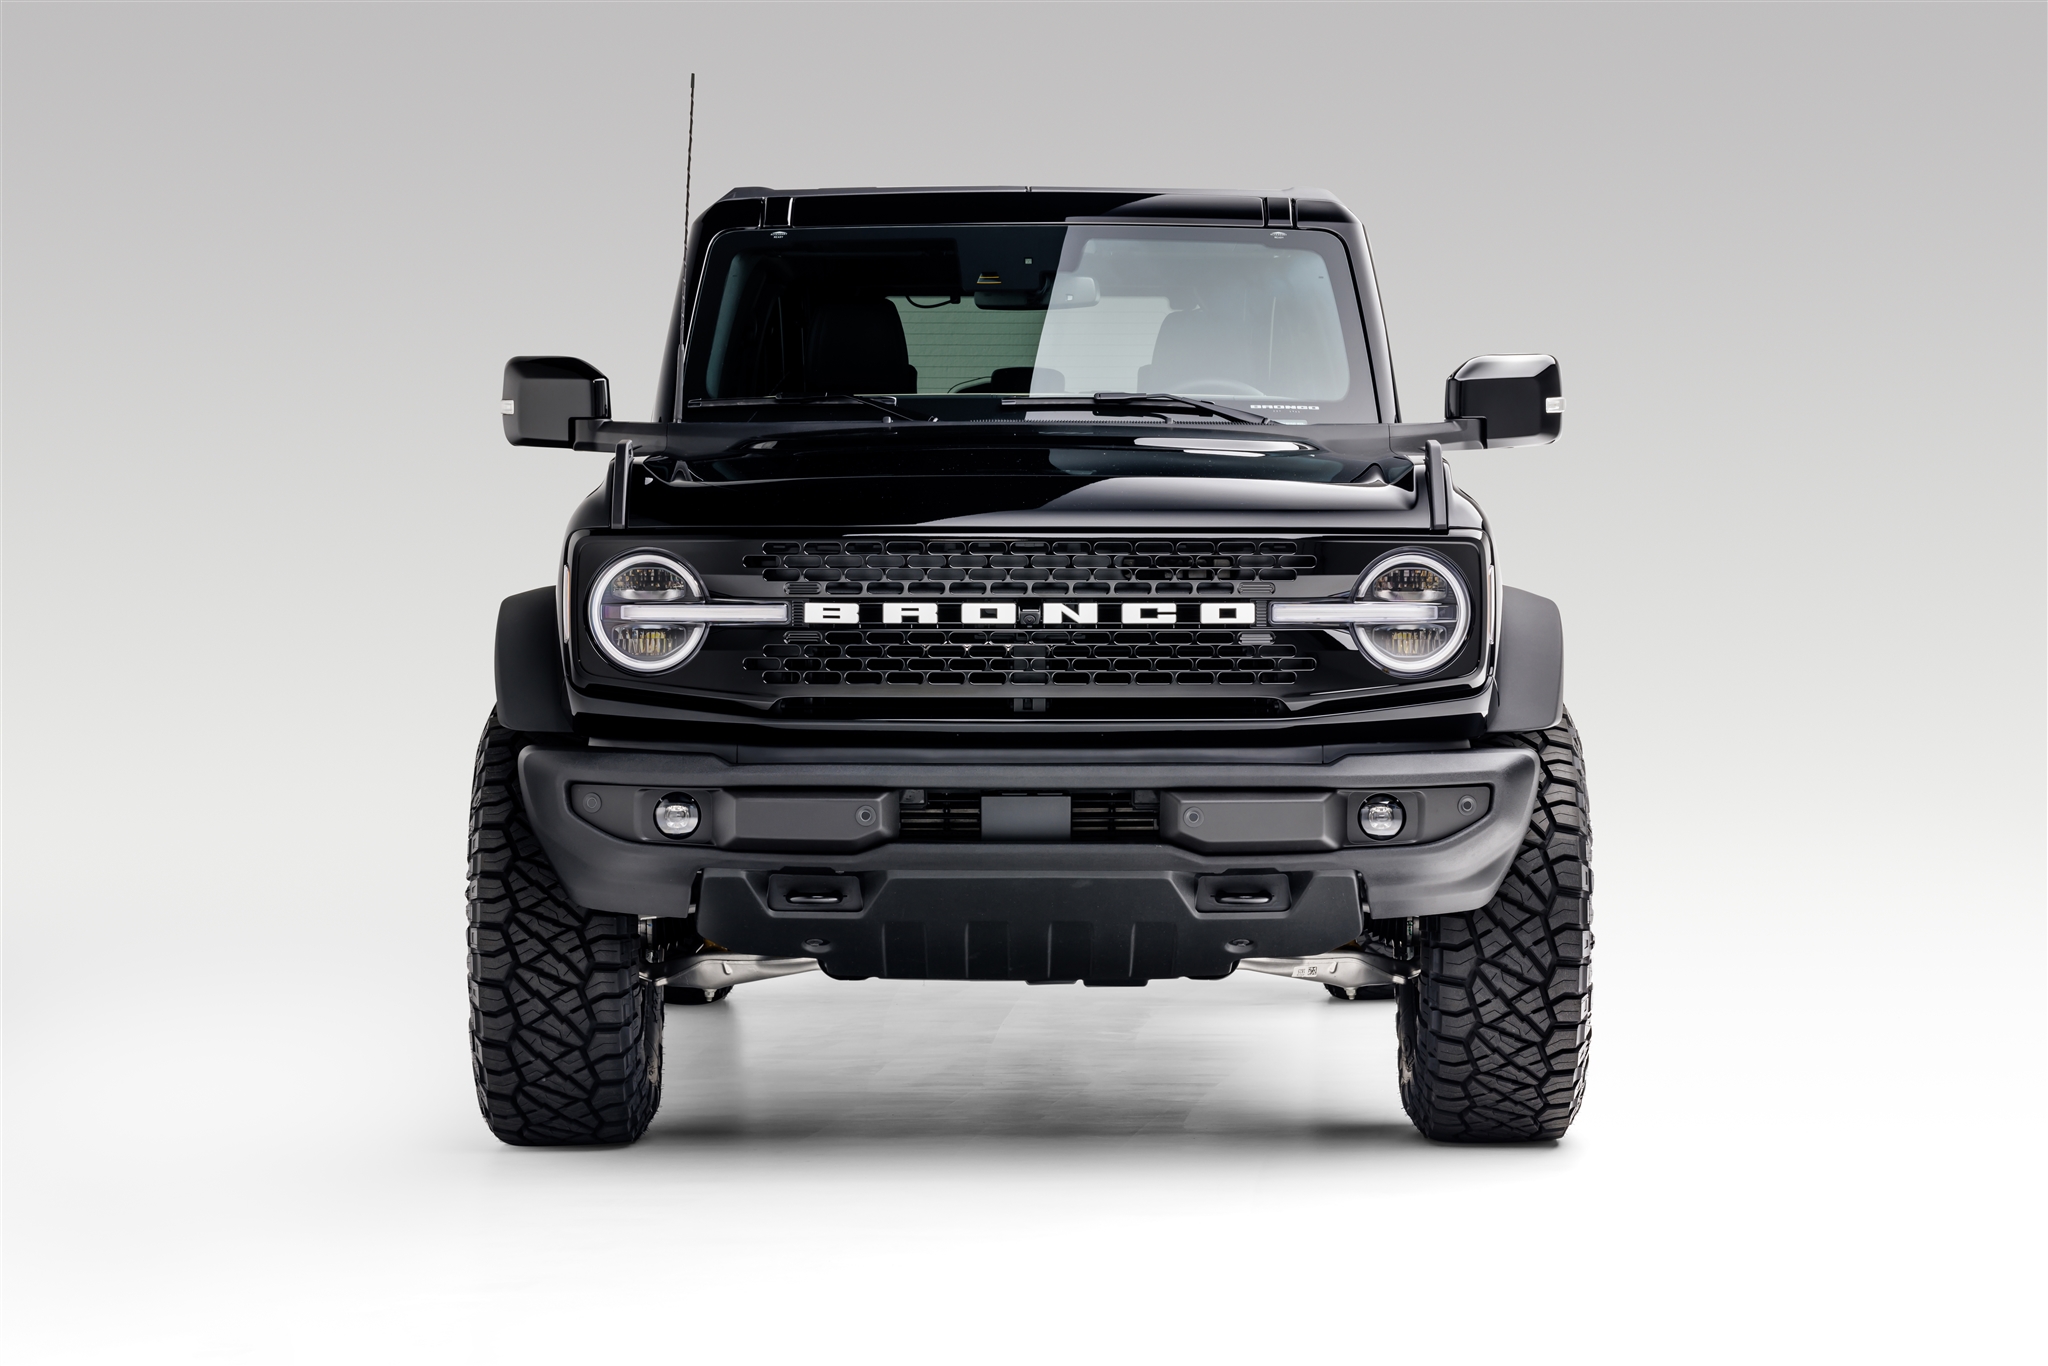 Ford Bronco Show us your installed wheel / tire upgrades here! (Pics) A13E6136-D995-453B-9FD8-9AE56A118D92